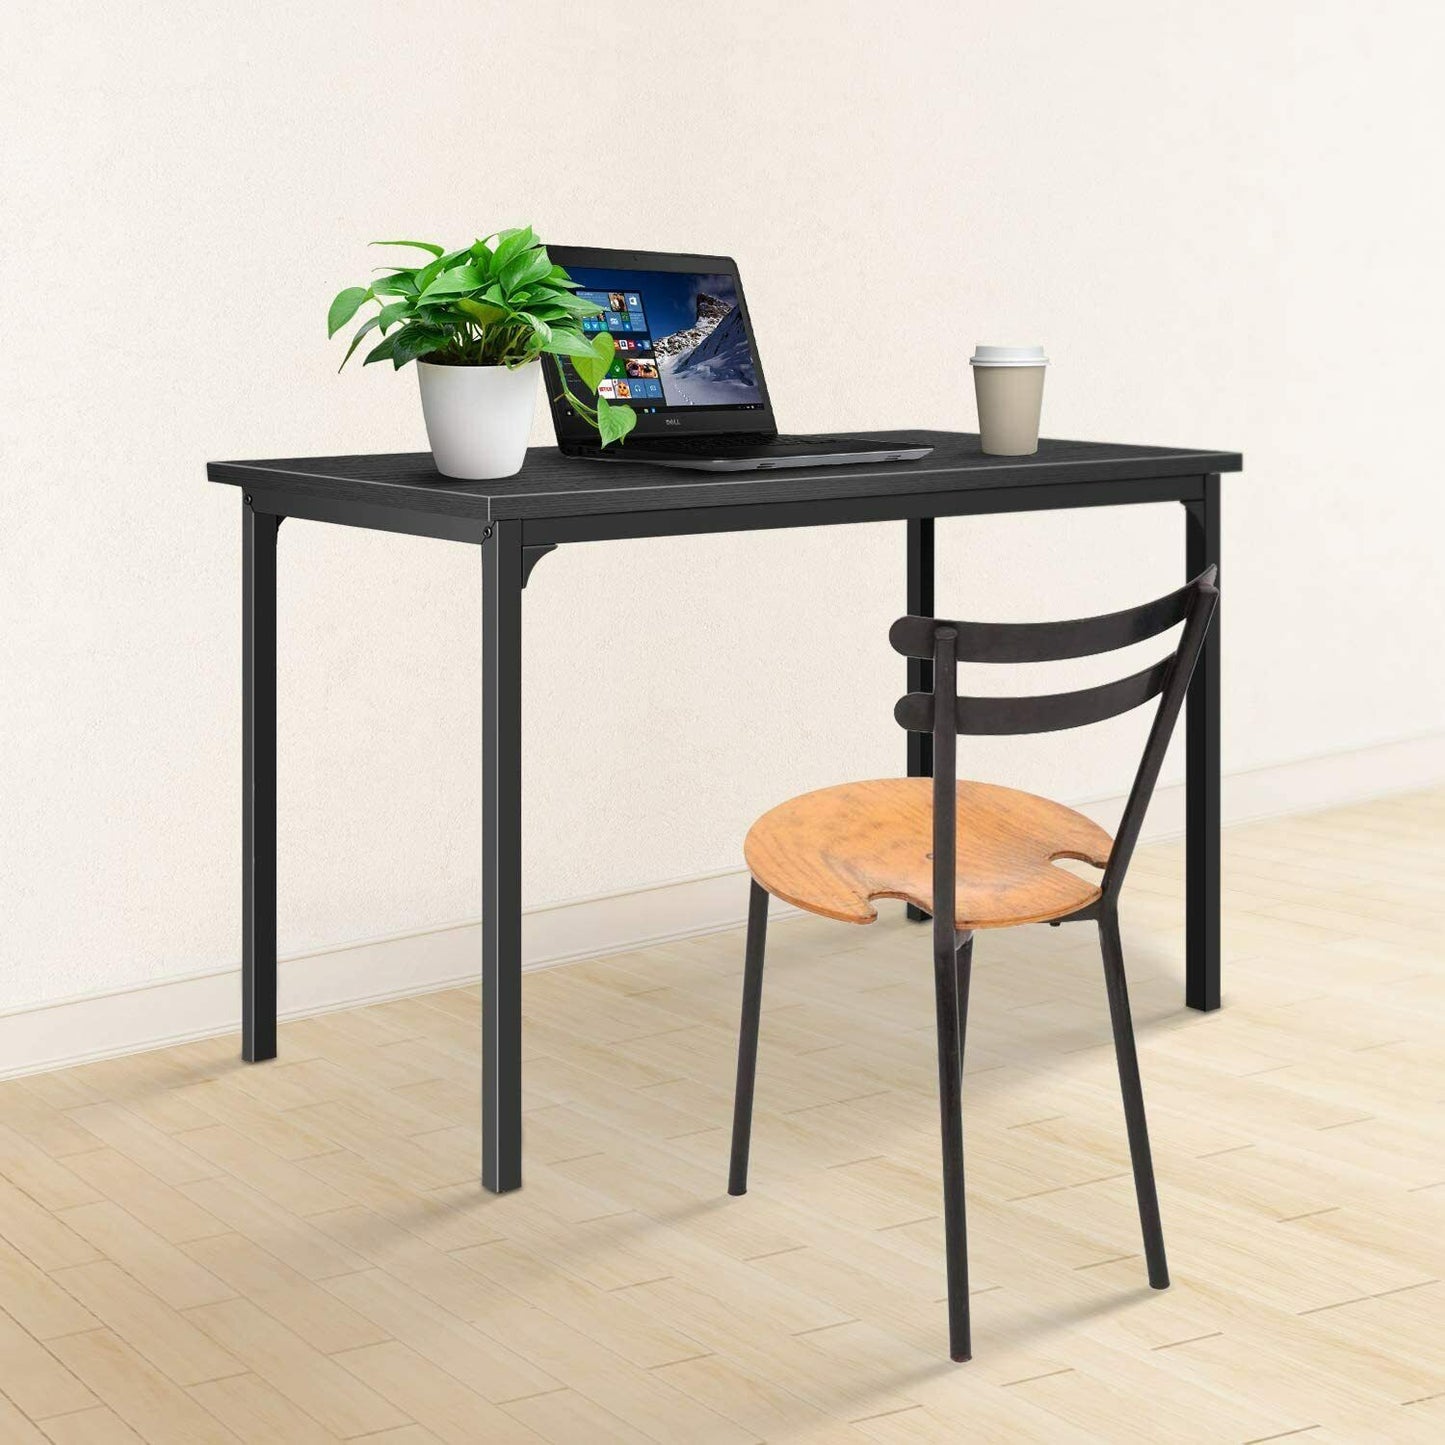 Modern Design, Simple Style Table Home Office Computer Desk for Working, Studying, Writing or Gaming, Black